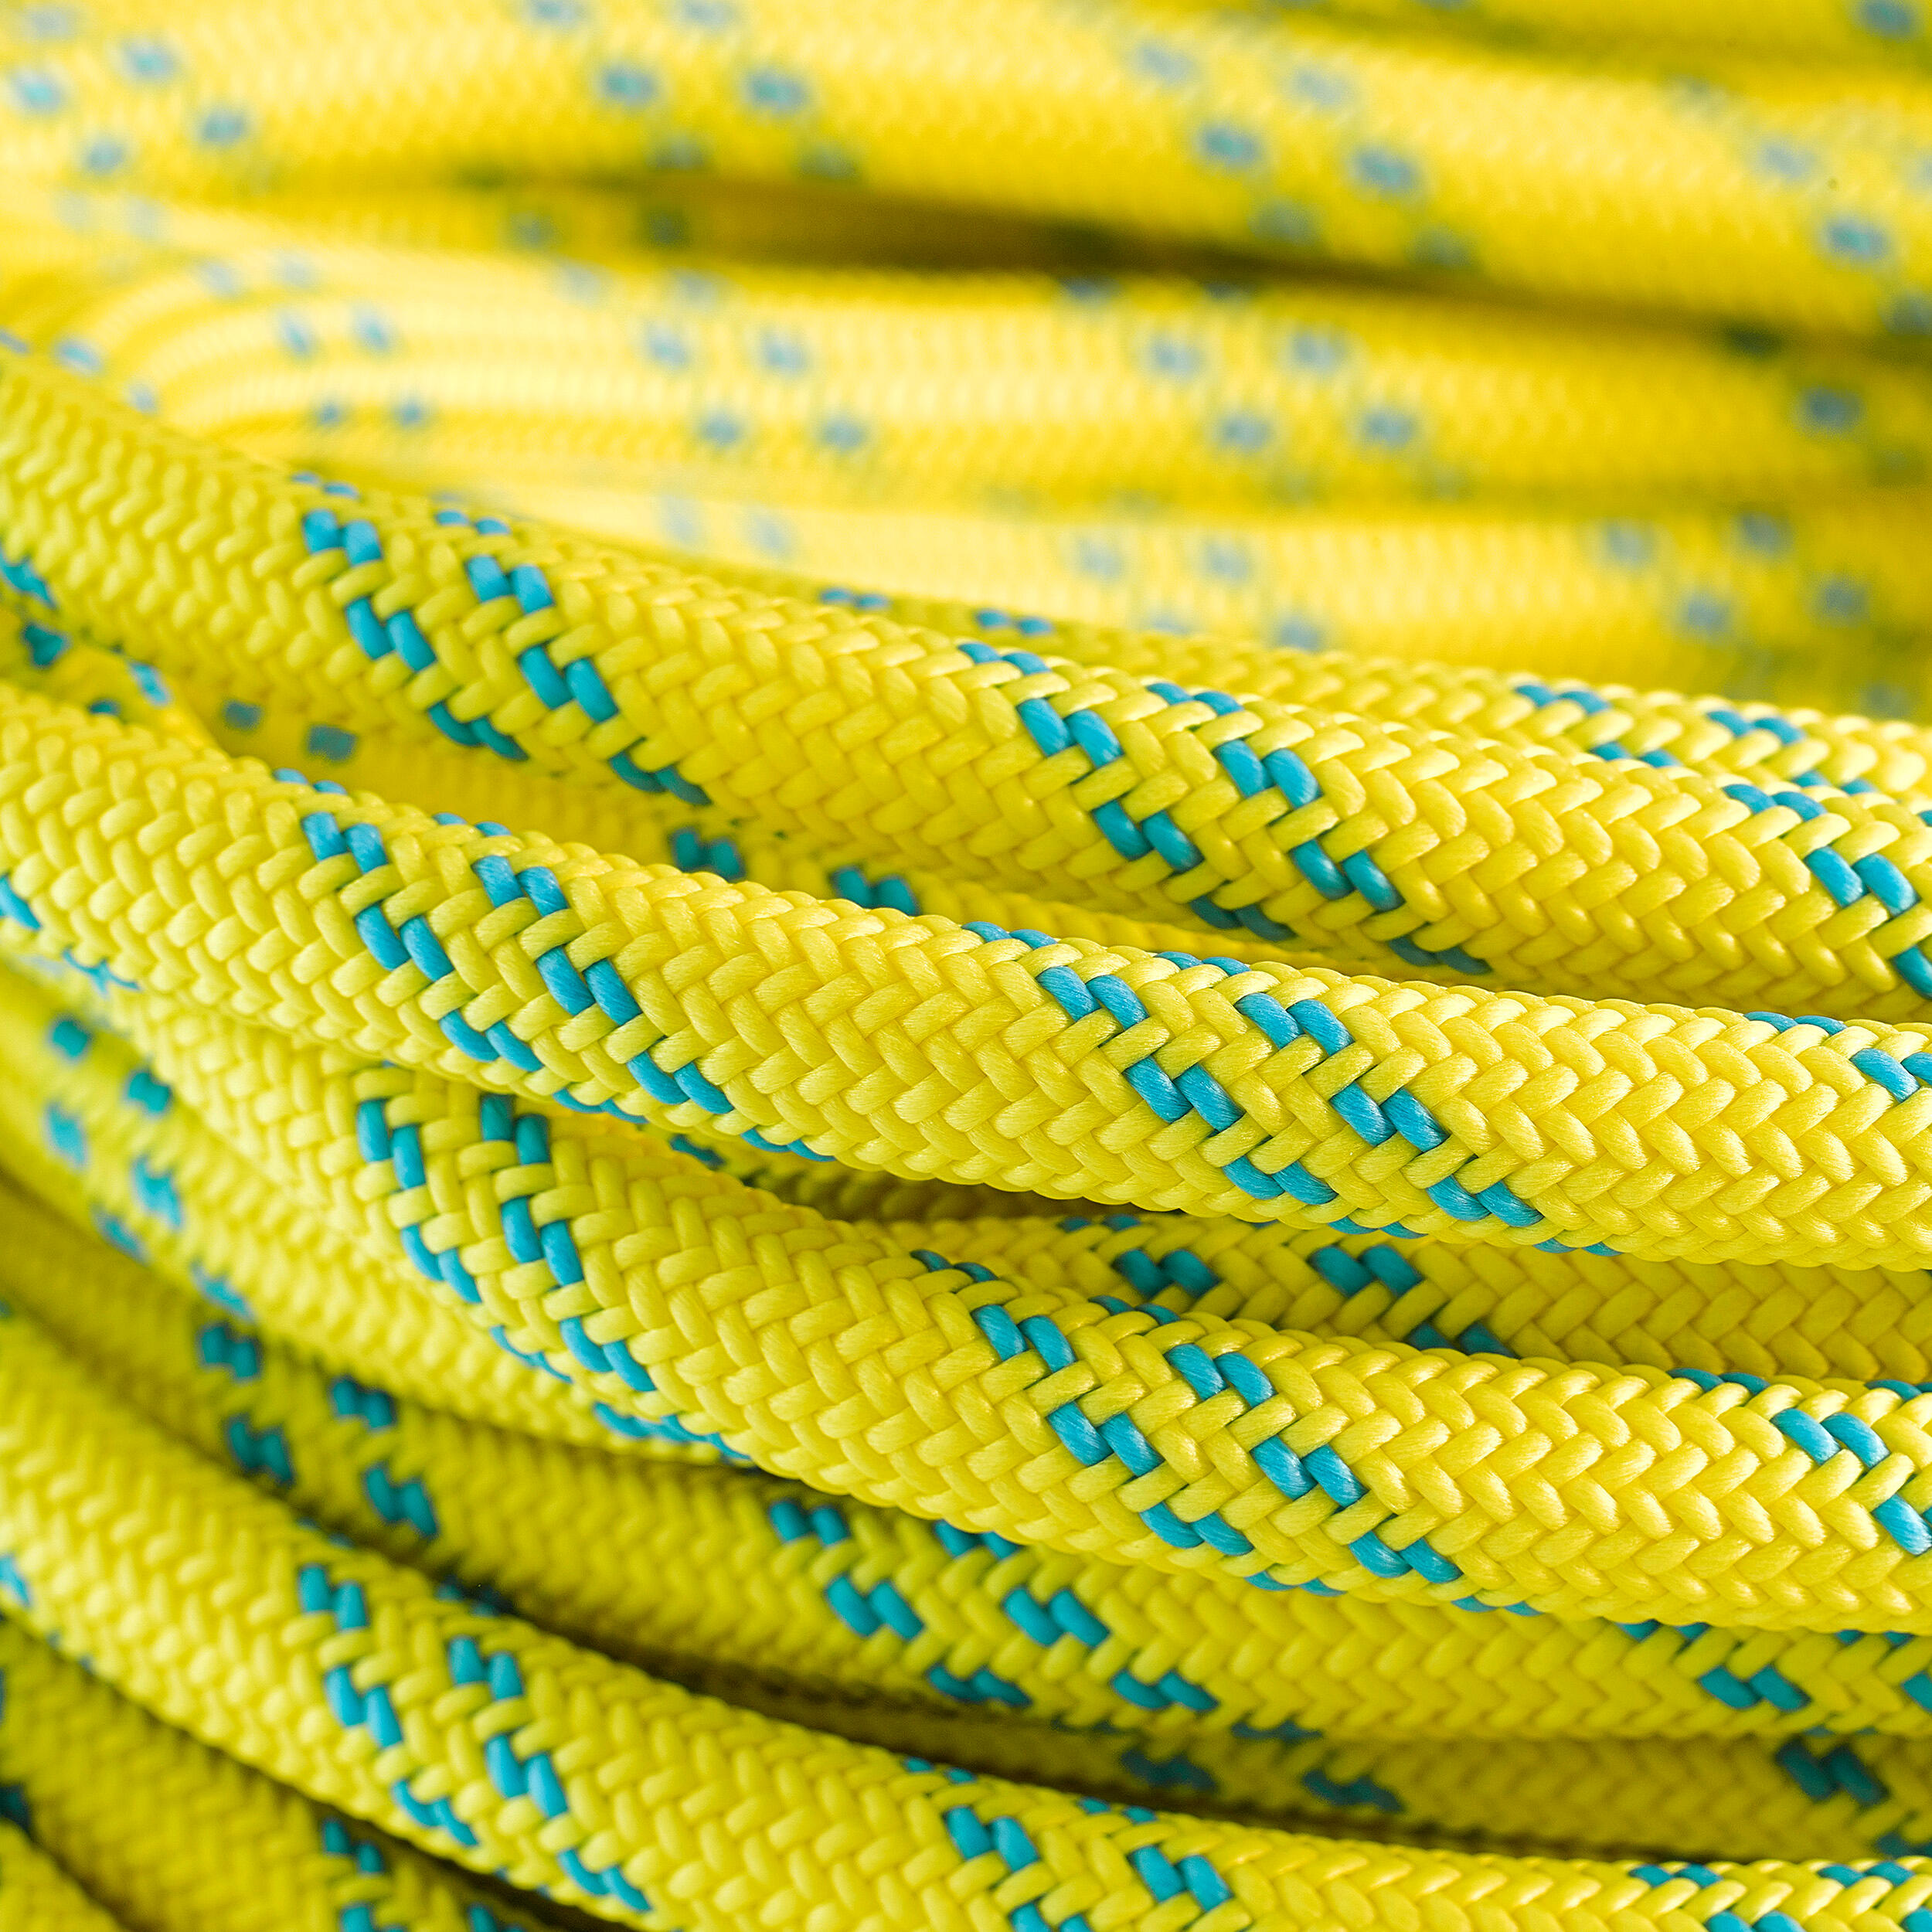 CLIMBING AND MOUNTAINEERING HALF ROPE - ABSEIL ICE 7.5 MM X 60M YELLOW 2/4